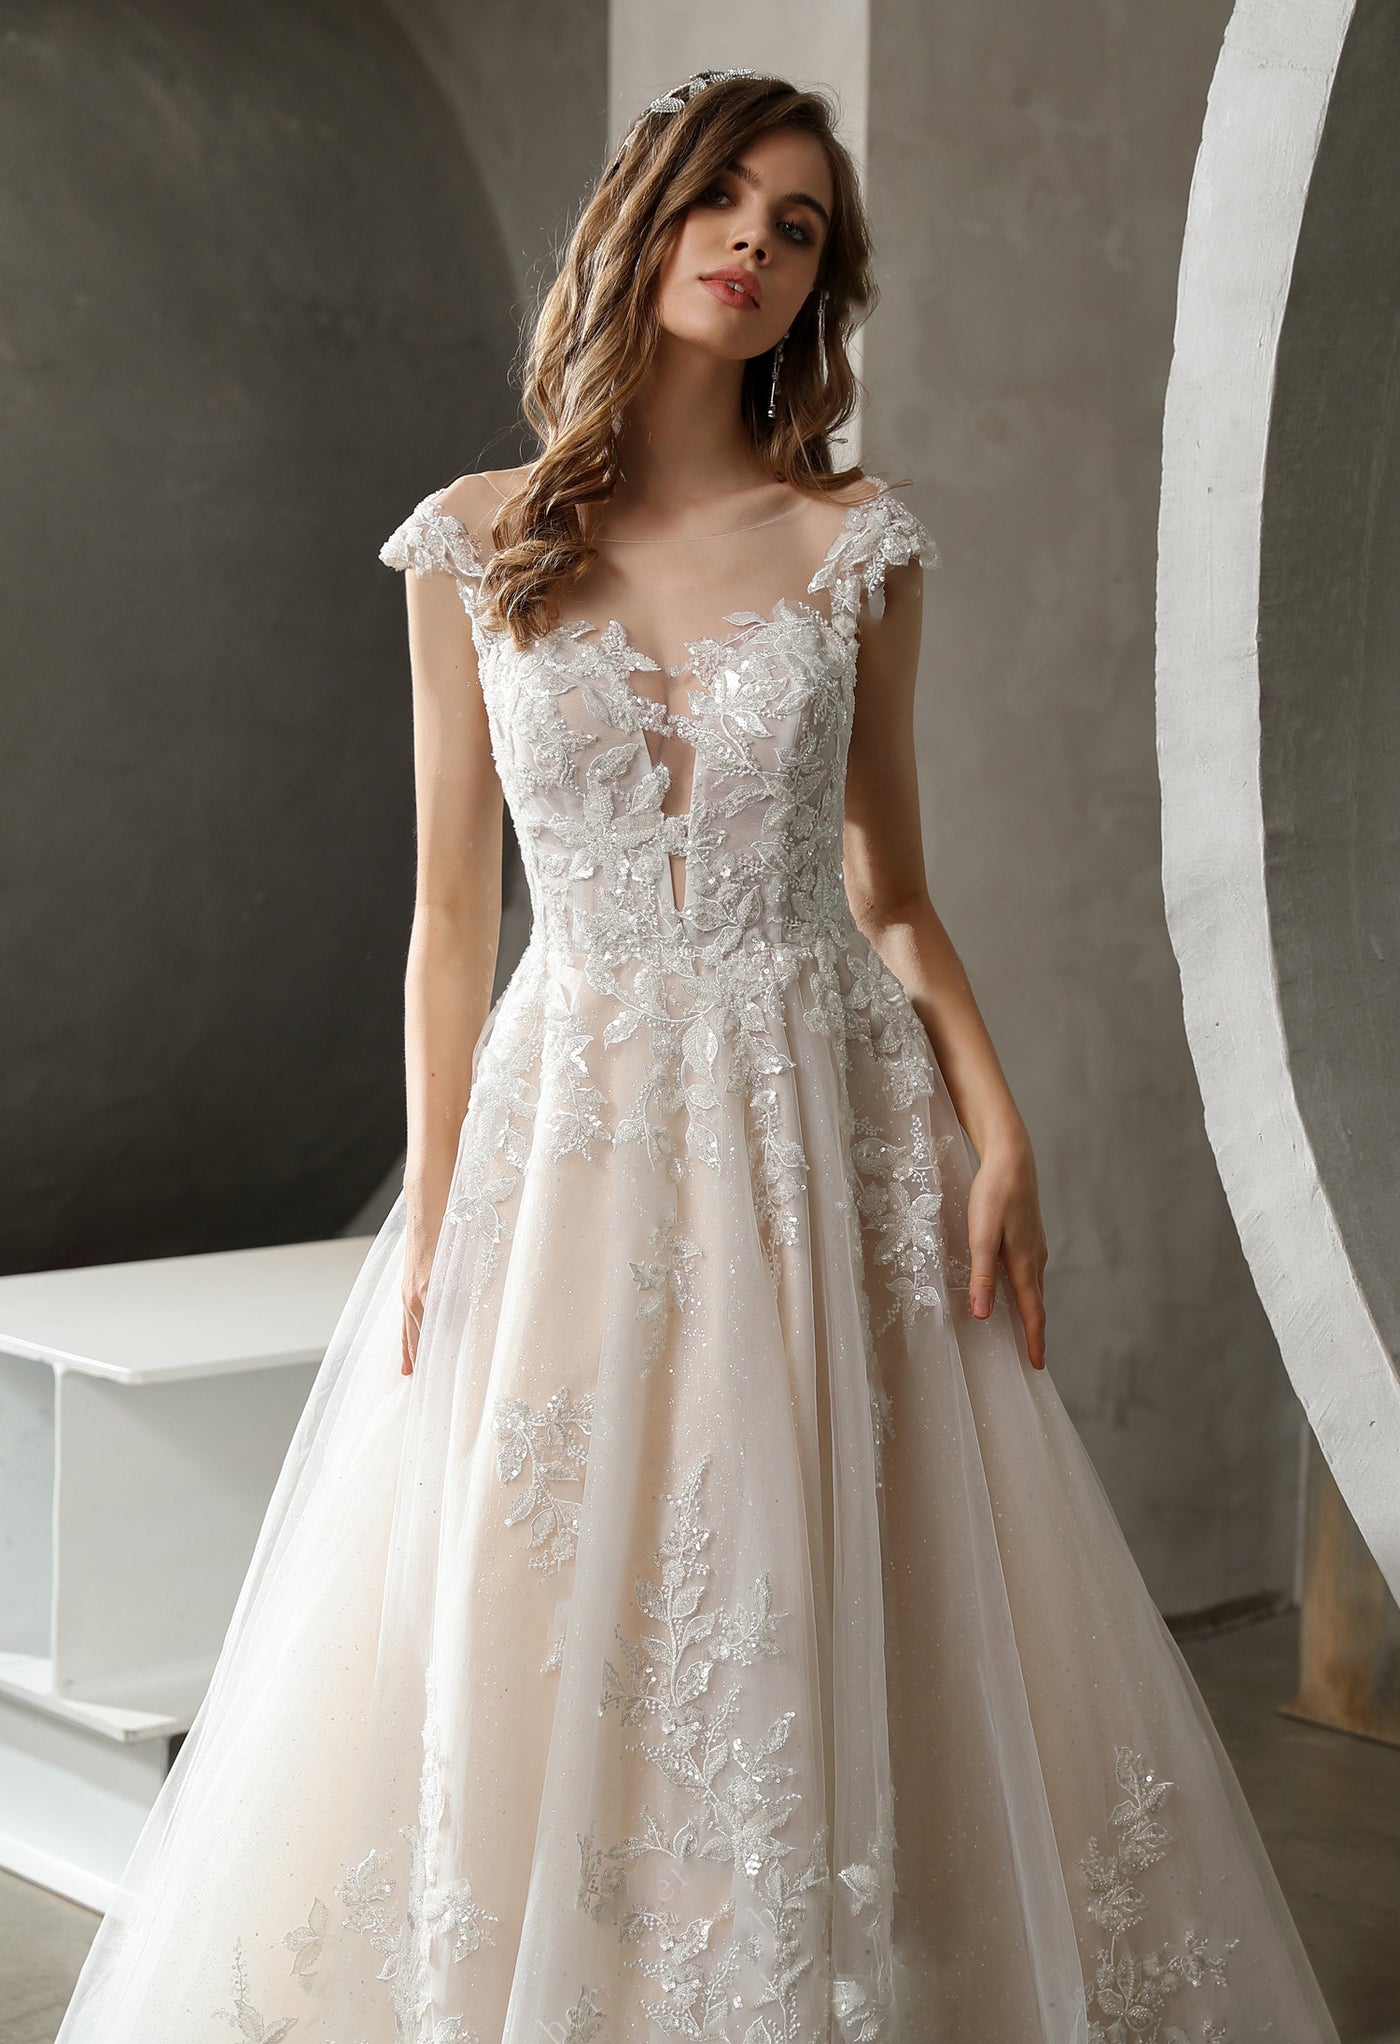 A beautiful Plunging Illusion Neckline with Beaded Lace A-line Wedding Dress available at Bergamot Bridal bridal shops in London.